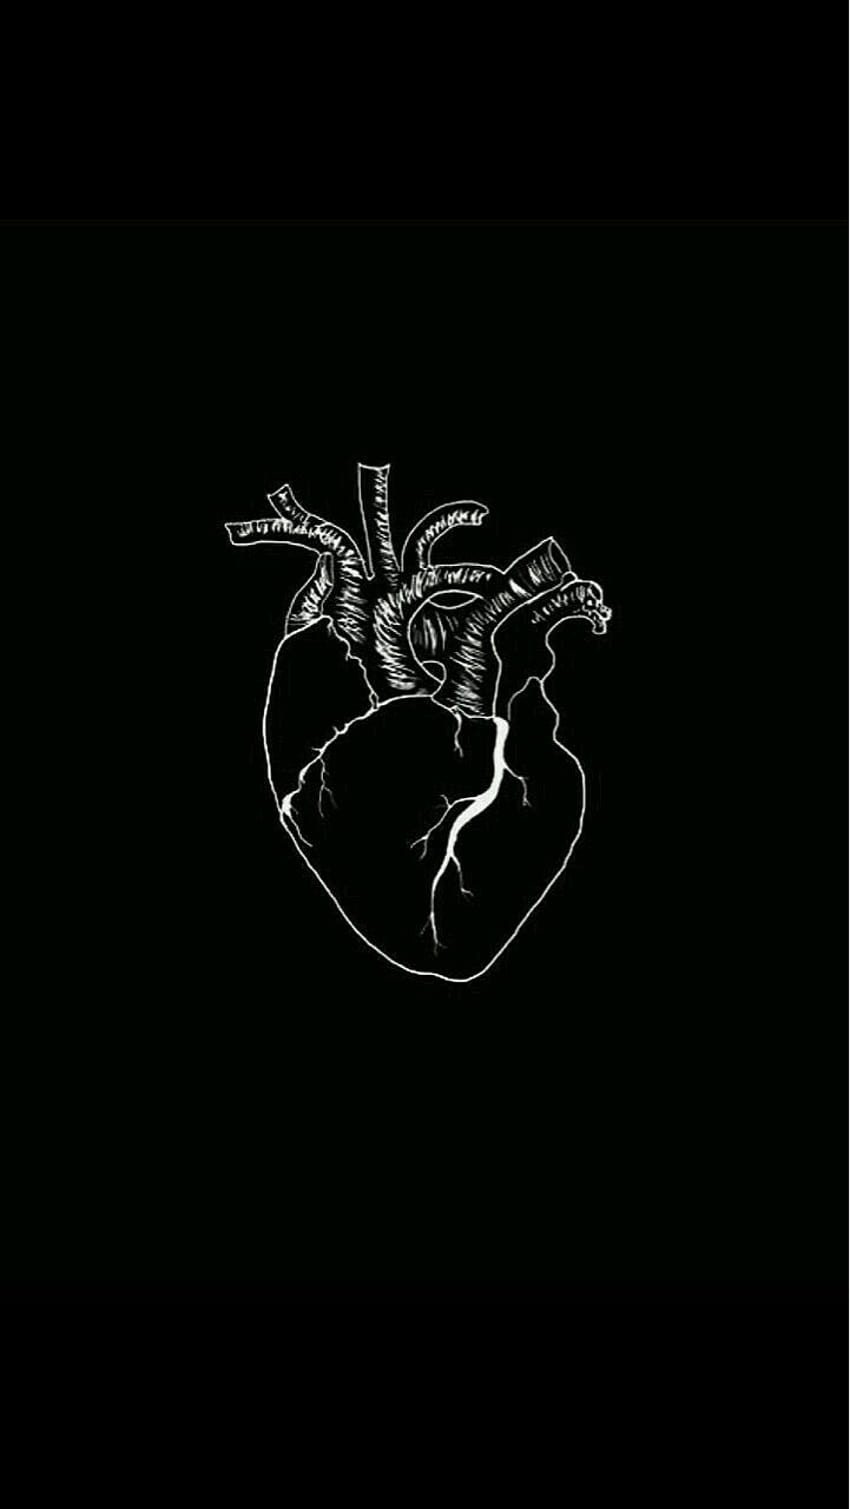 A black and white image of a heart with a caption and list of tags - Medical